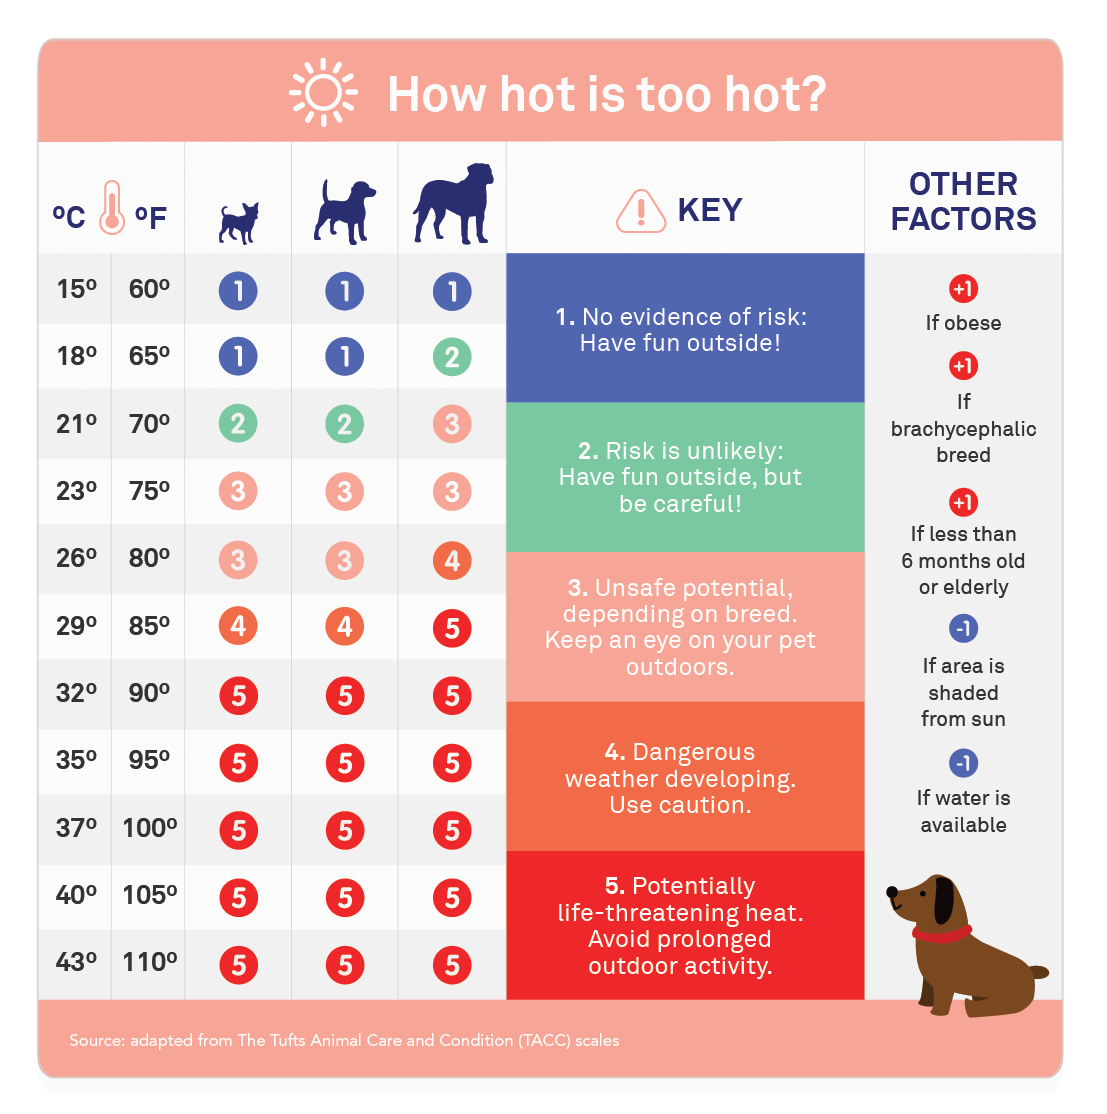 WEATHER CONSIDERATIONS FOR DOG WALK